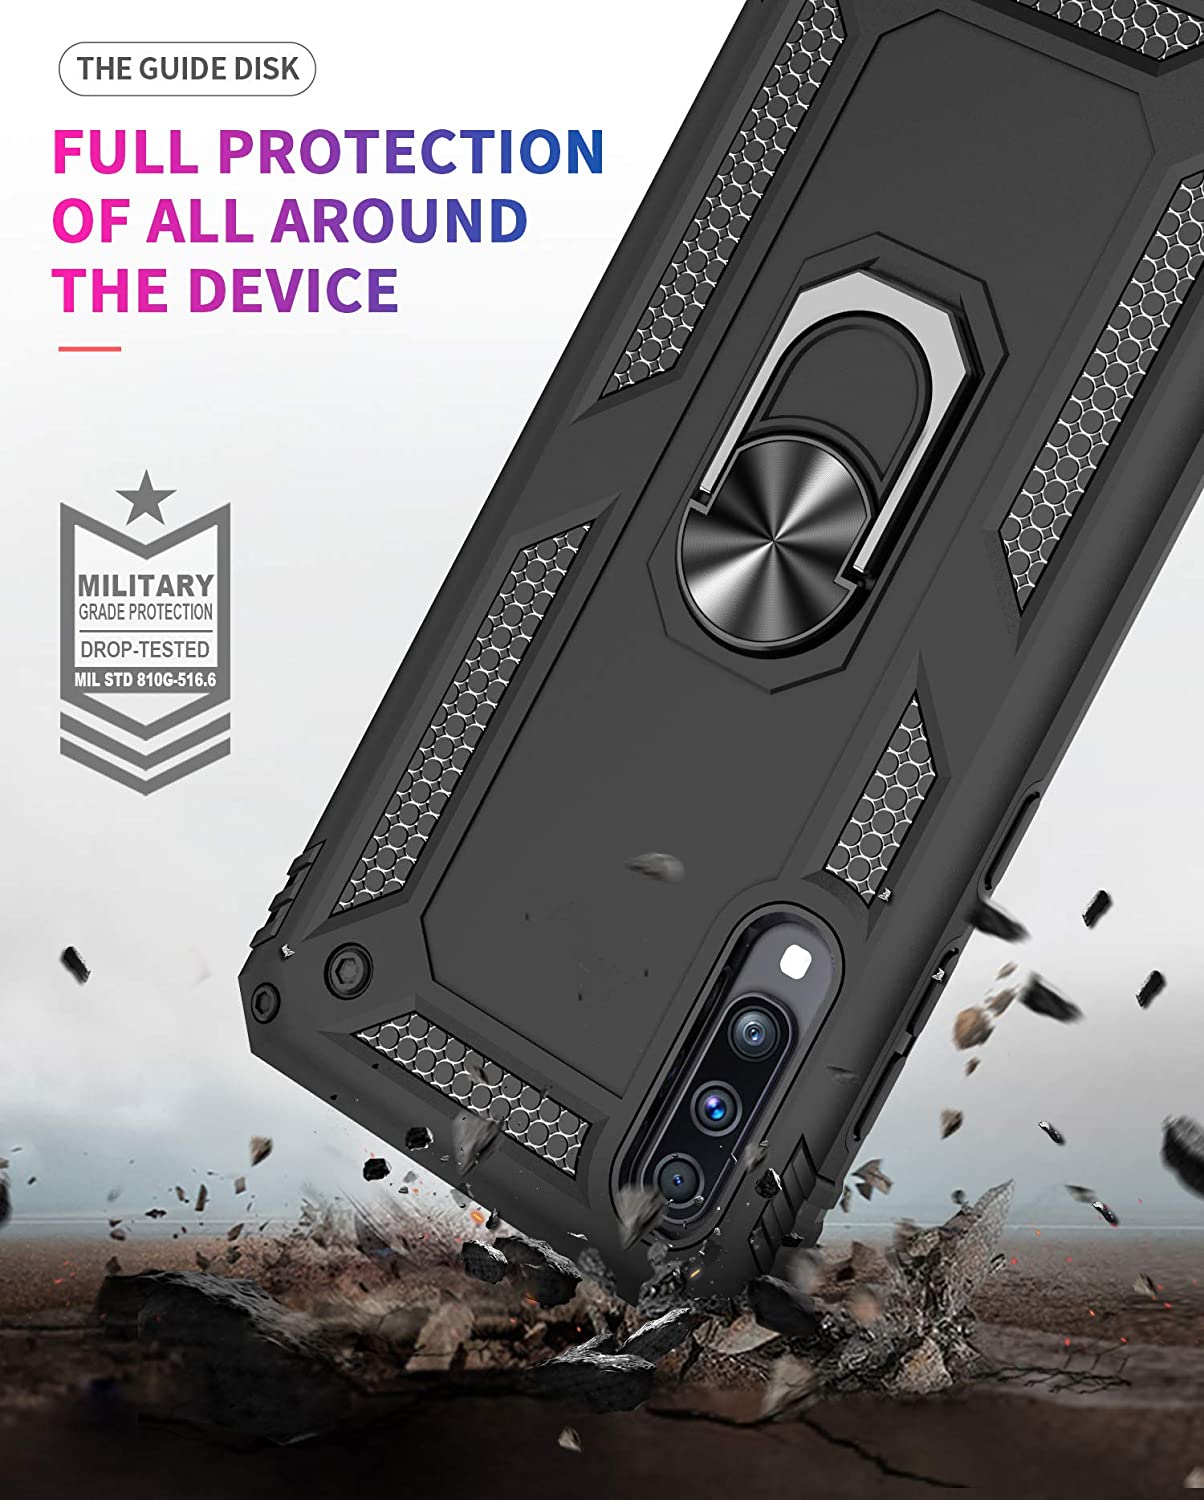 Samsung Galaxy A52 Case Shockproof Heavy Duty Ring Rugged Armor Case Cover